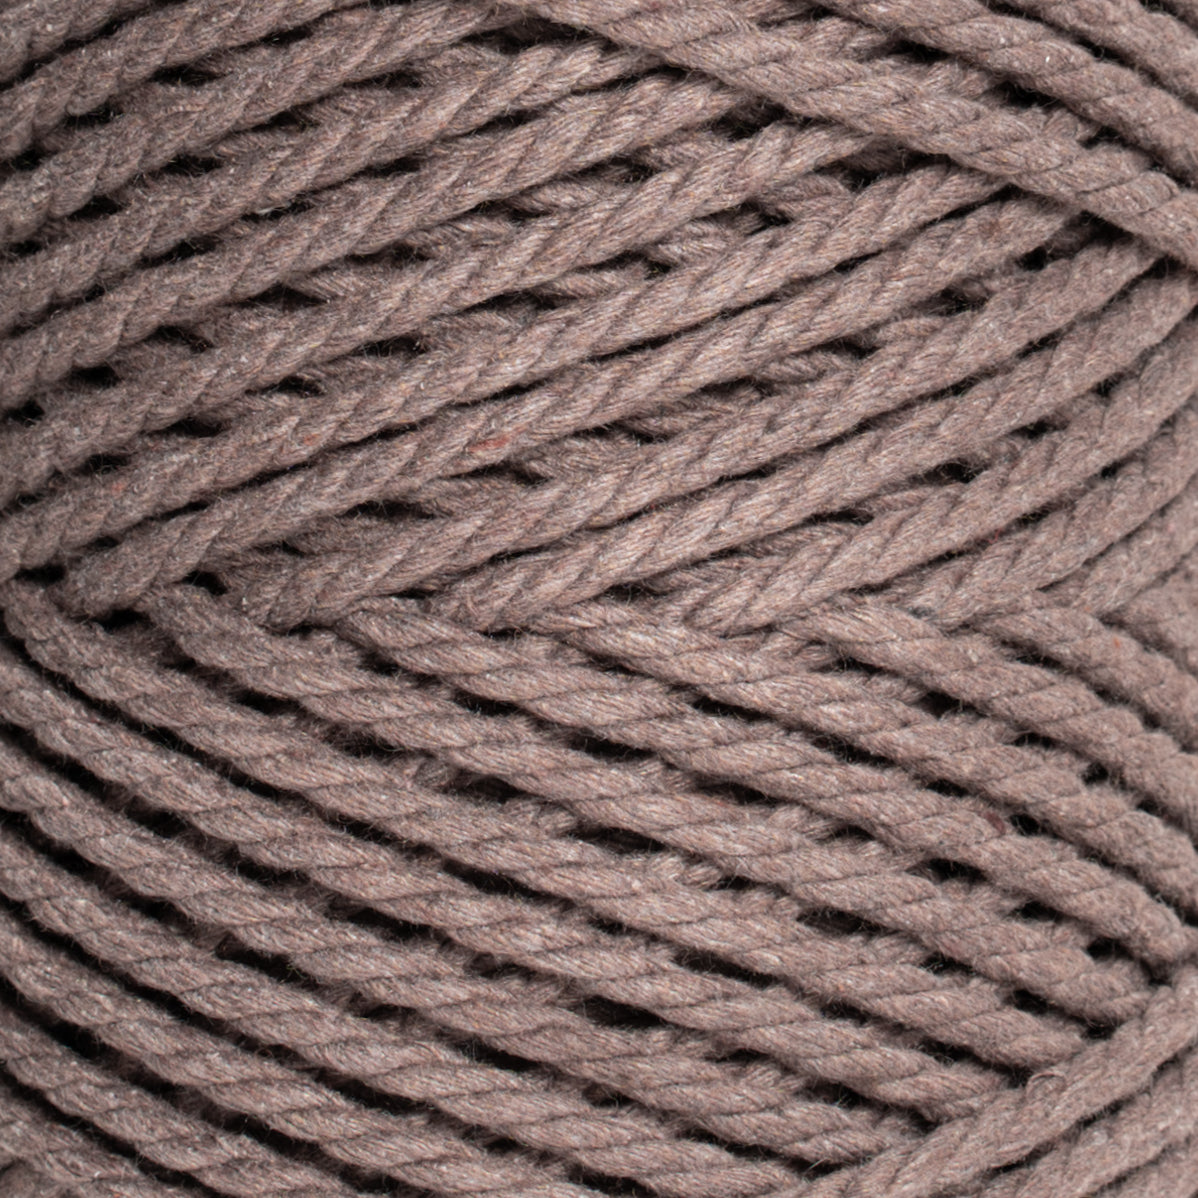 COTTON ROPE ZERO WASTE 3 MM - 3 PLY - WOOD BROWN COLOR